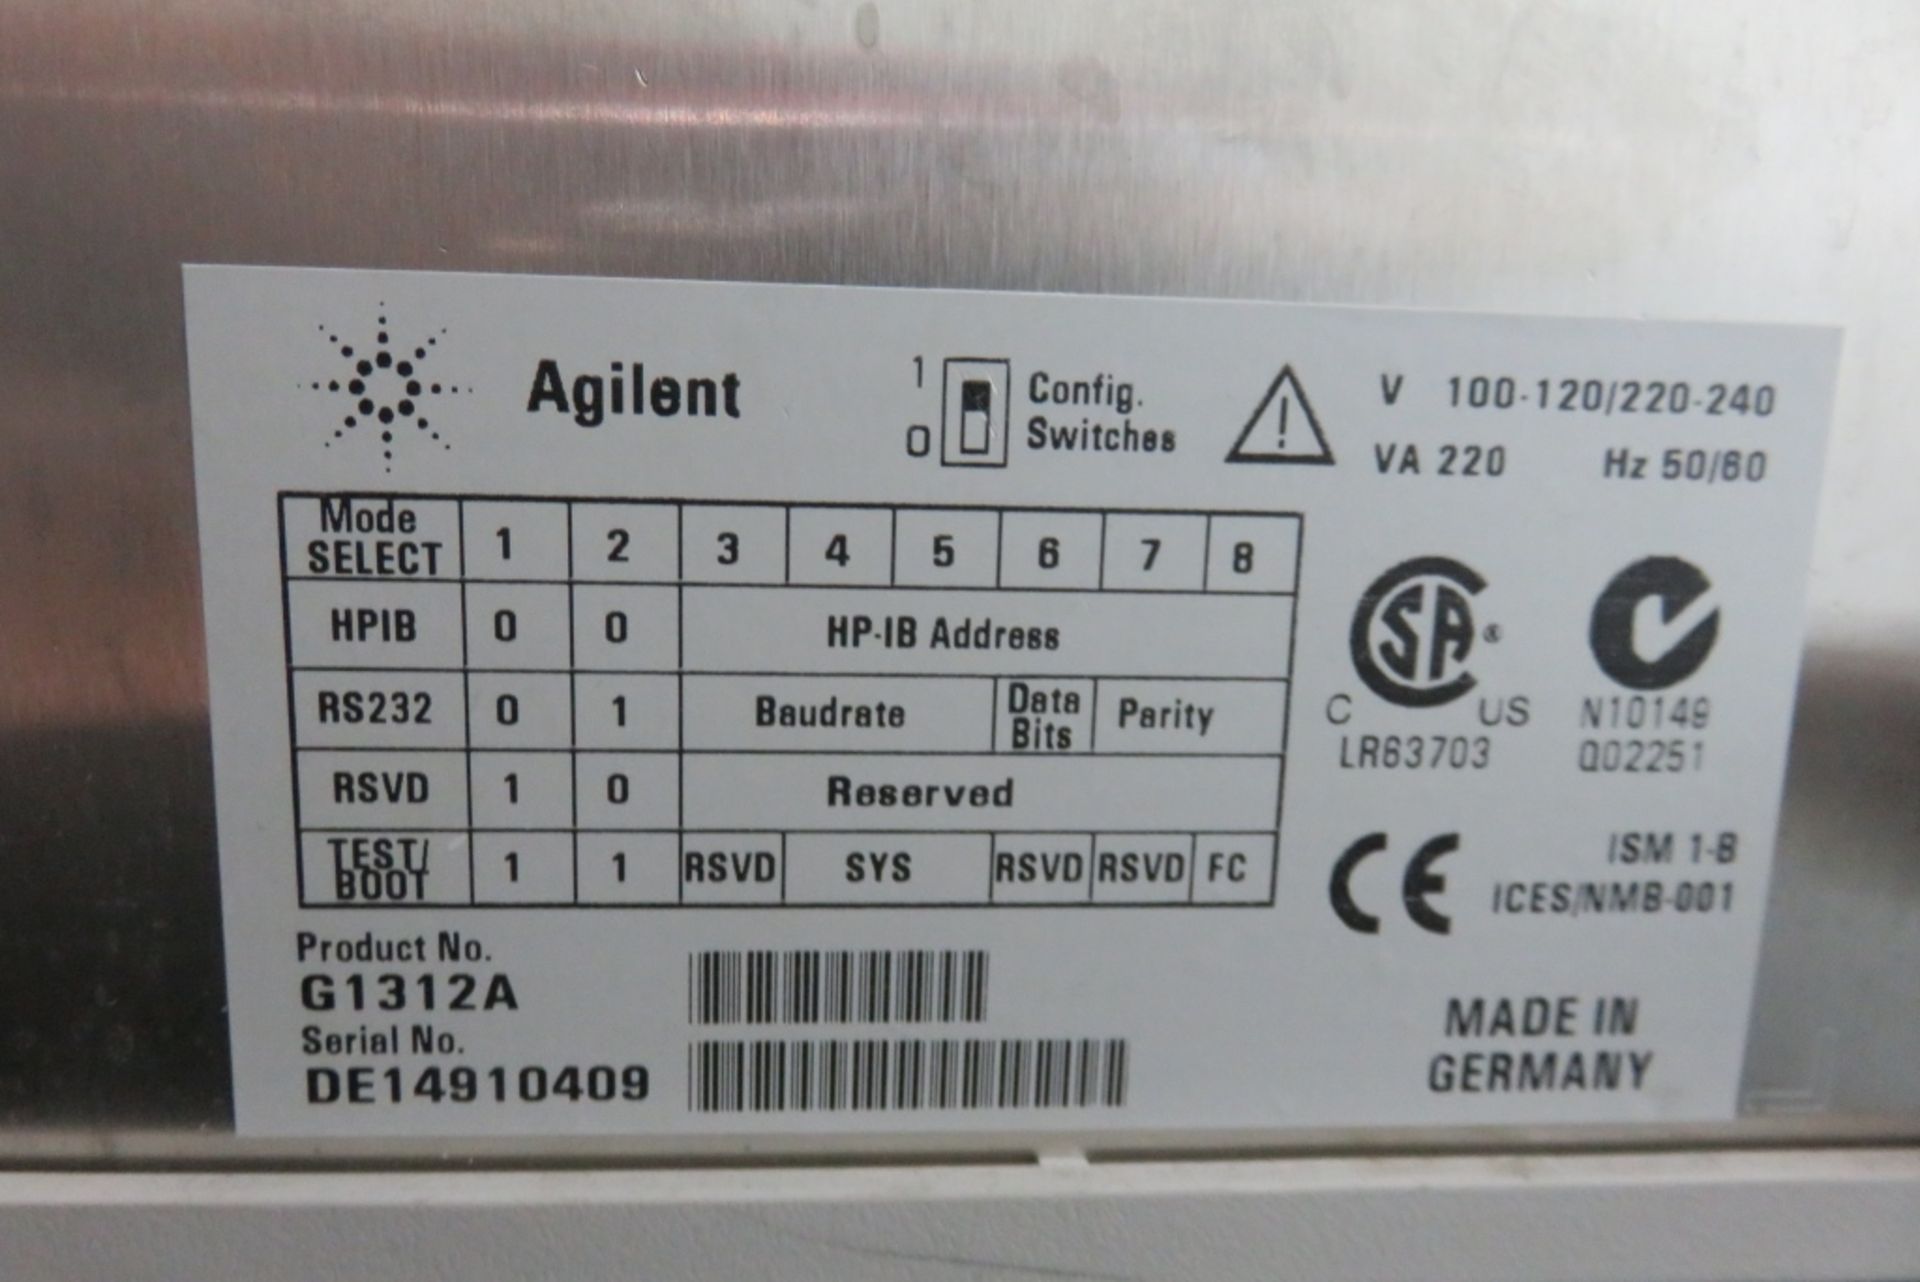 Agilent 1100 HPLC System with DAD Detector - Image 14 of 16